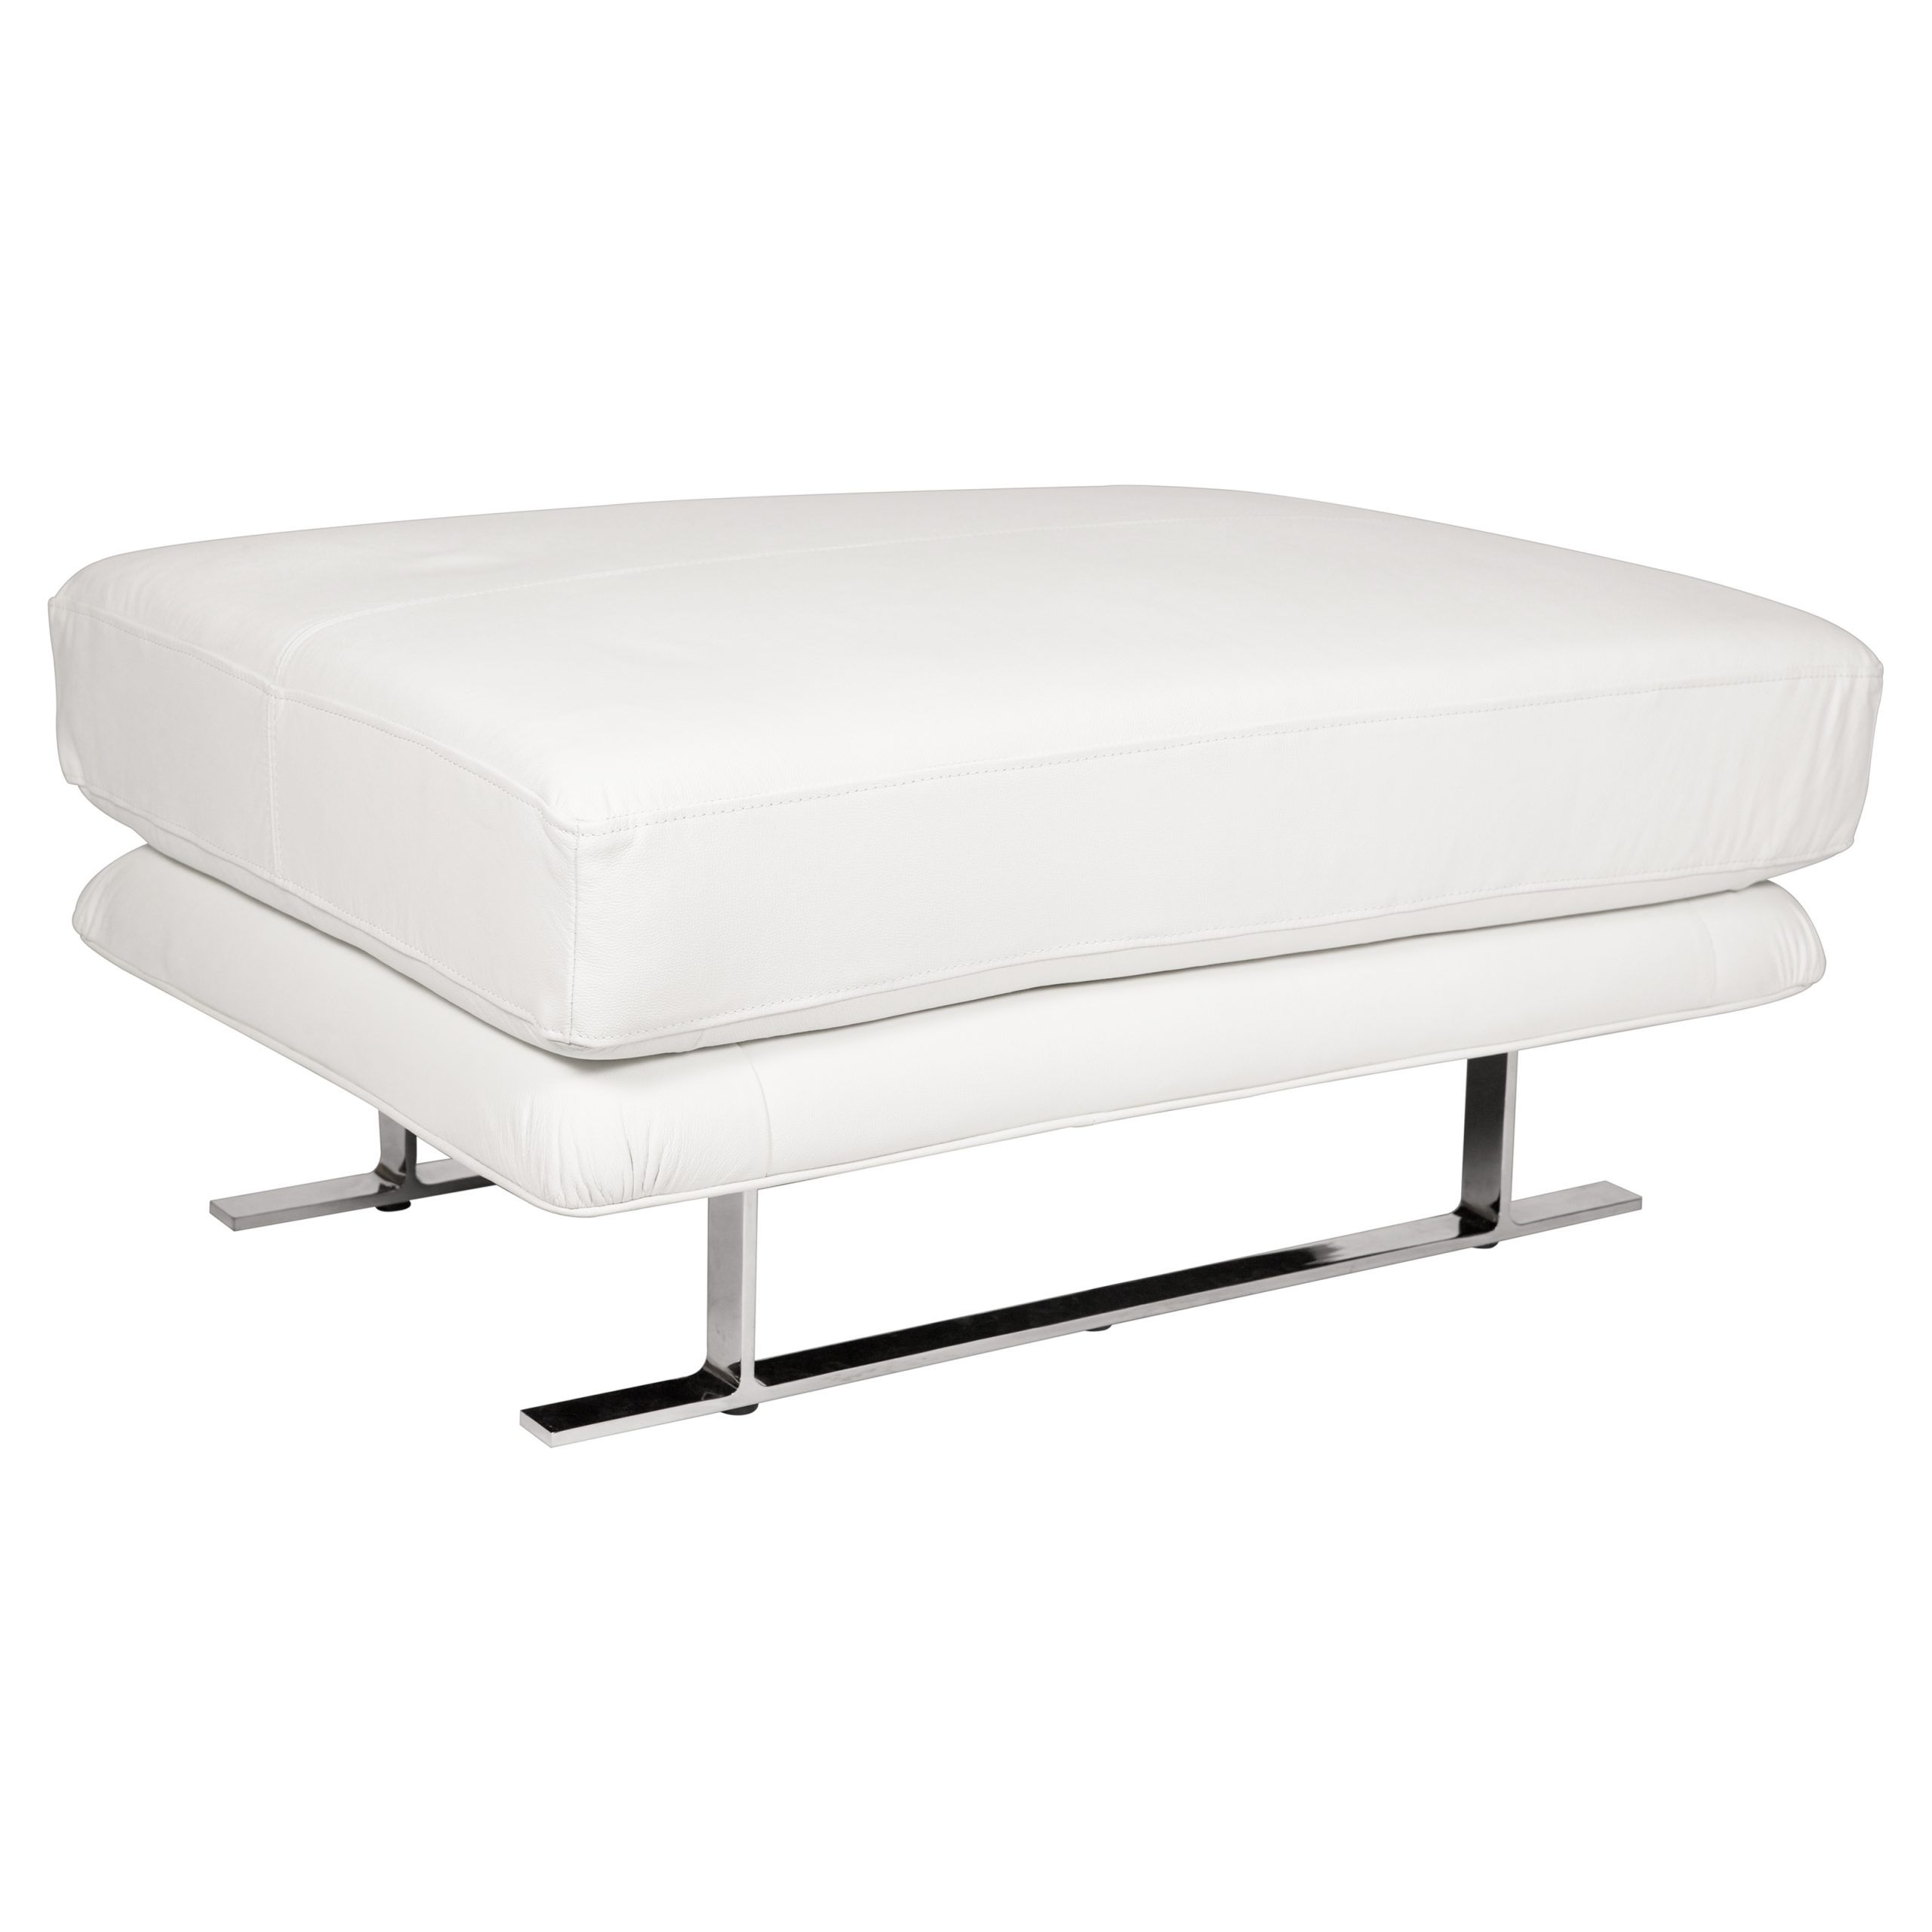 Savoy Leather Ottoman With Chrome Legs – White At Hayneedle Within Small White Hide Leather Ottomans (View 11 of 20)